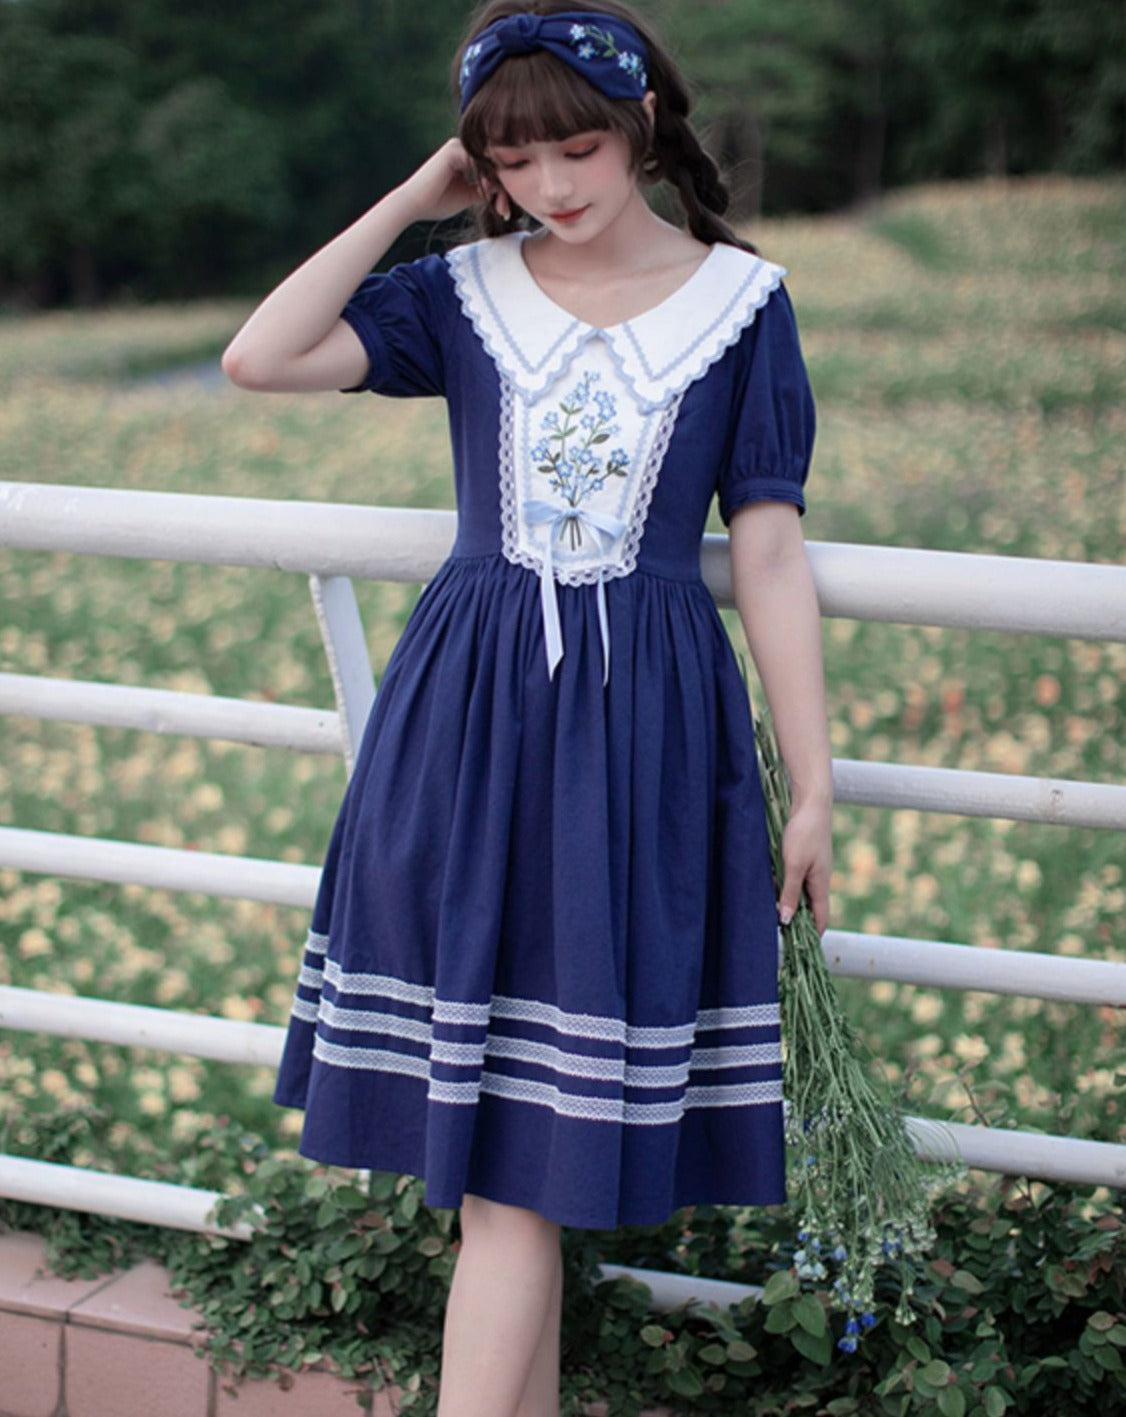 Forget-me-not bouquet embroidery dress